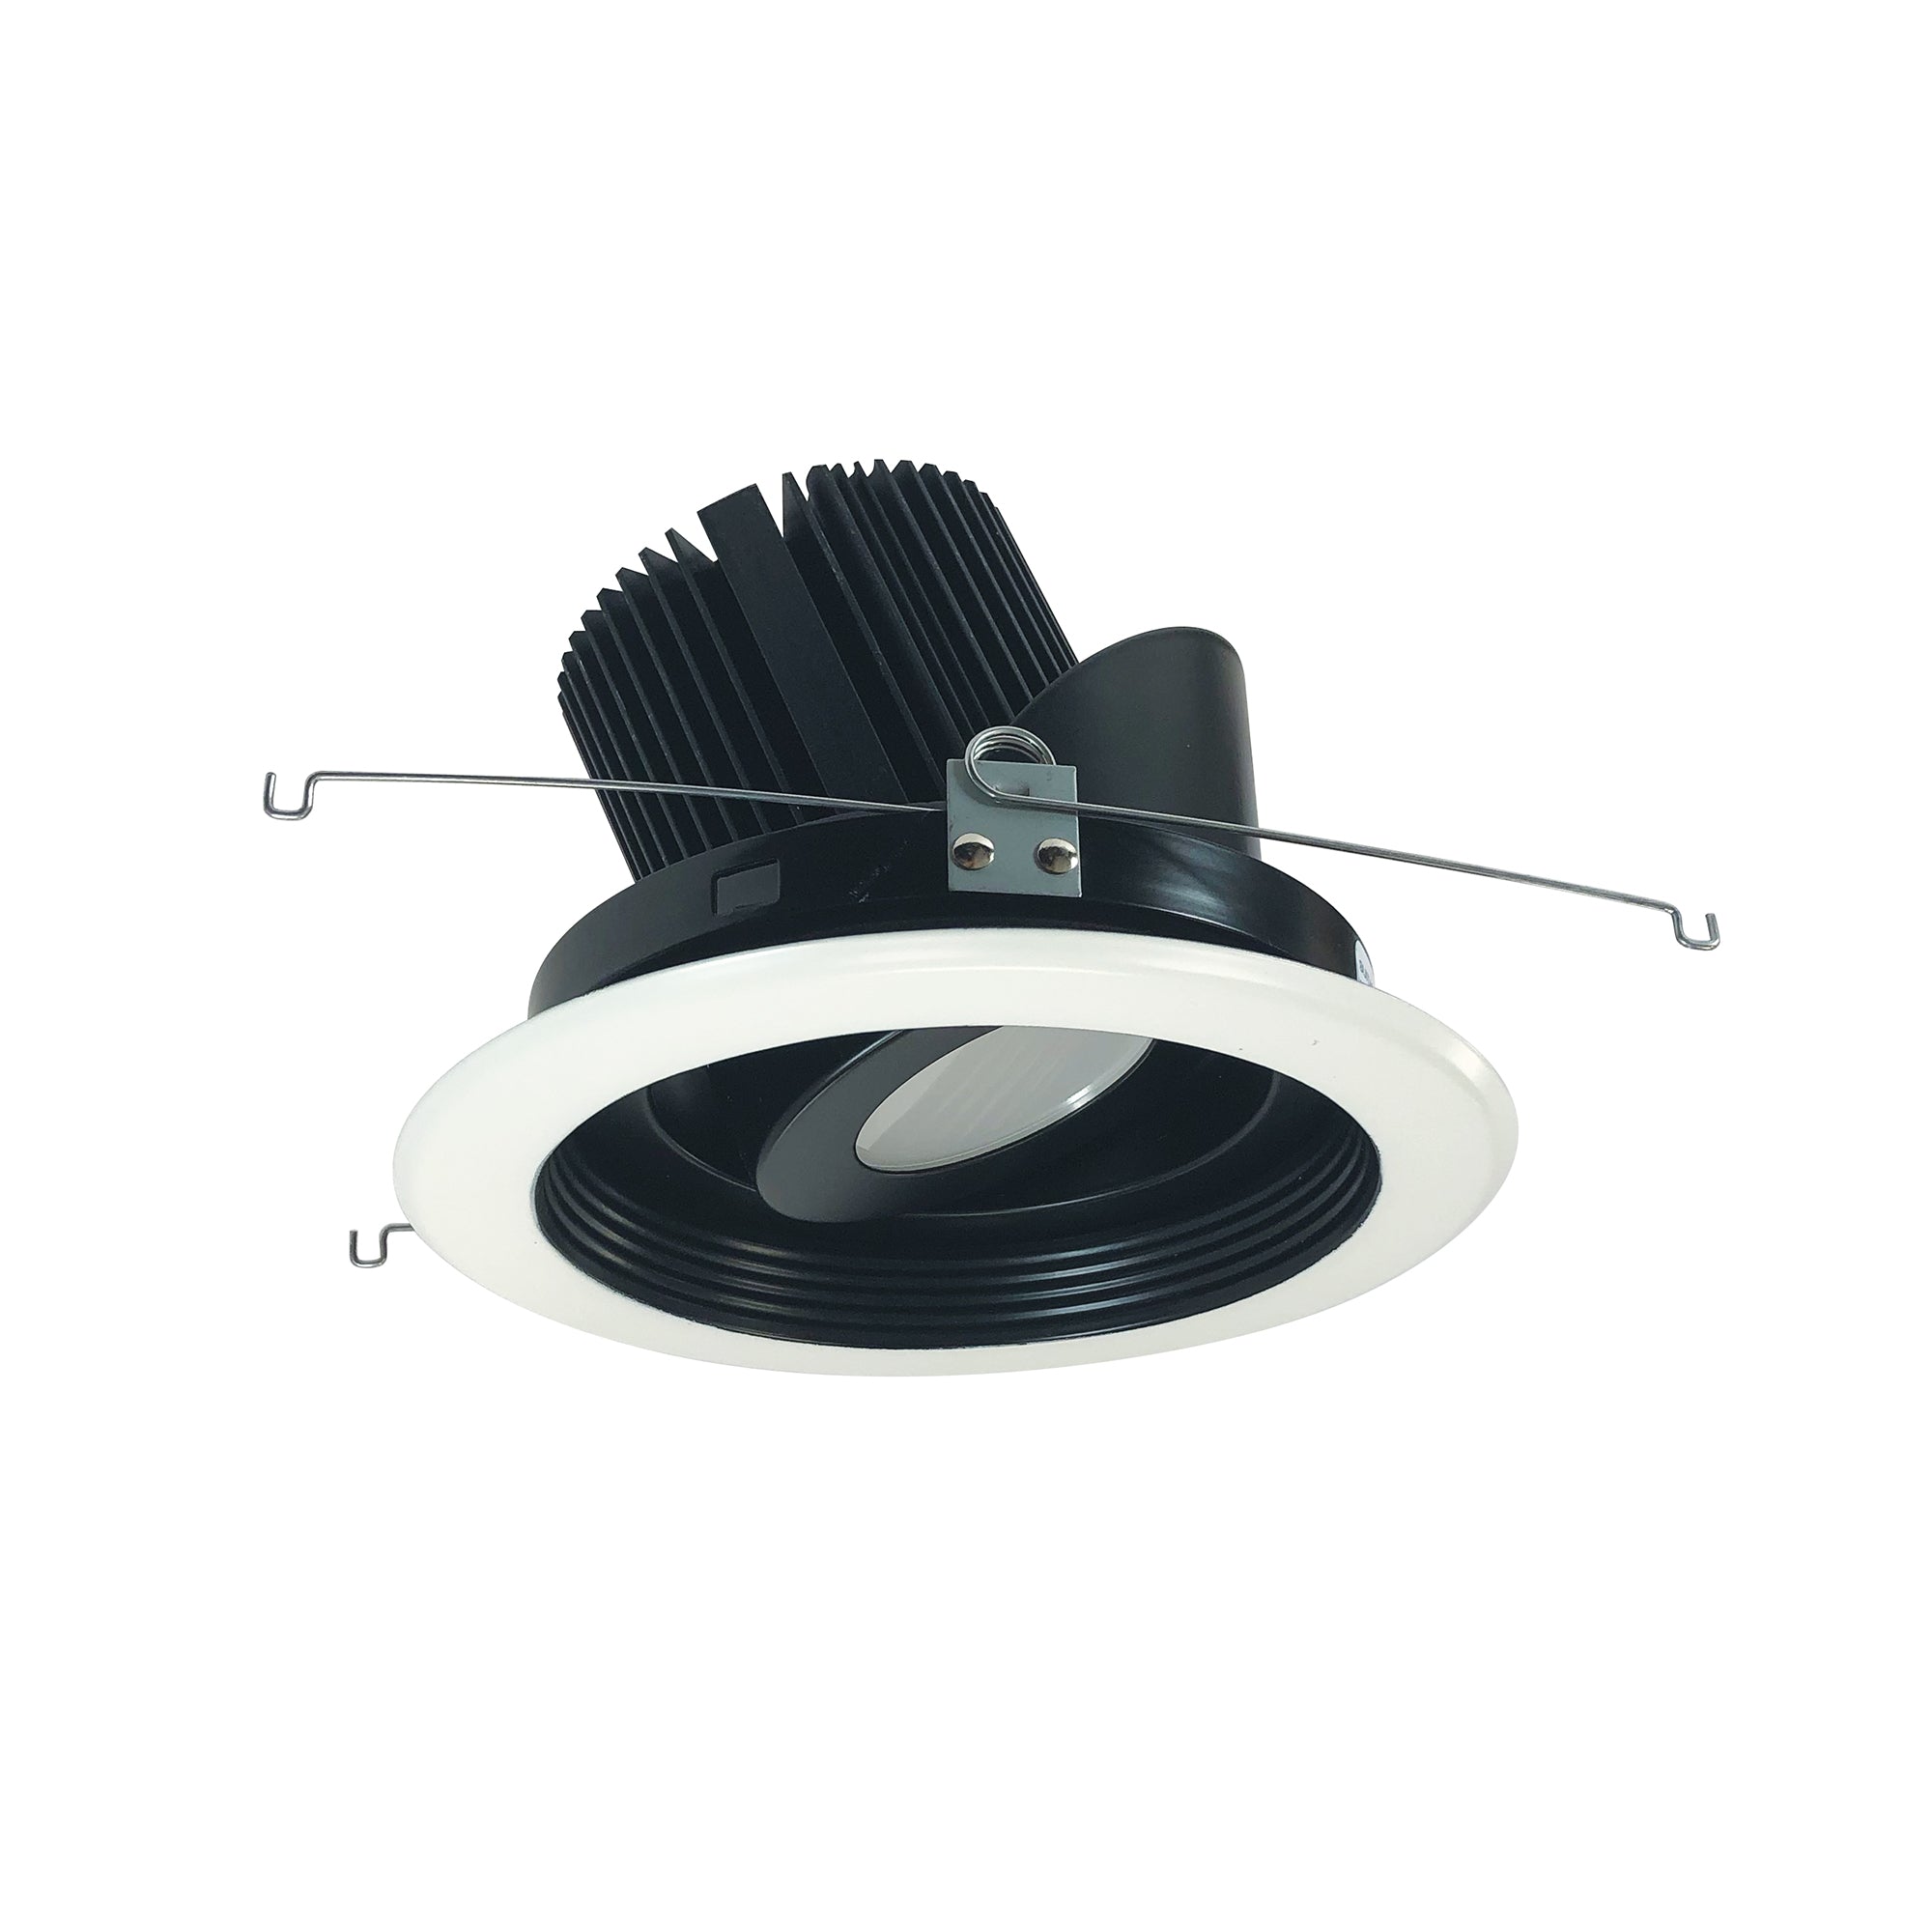 Nora Lighting NRM2-617L2535SBW - Recessed - 6 Inch Marquise II Round Regressed Adj. Baffle, Spot, 2500lm, 3500K, Black/White (Not Compatible with NHRM2-625 Housings)